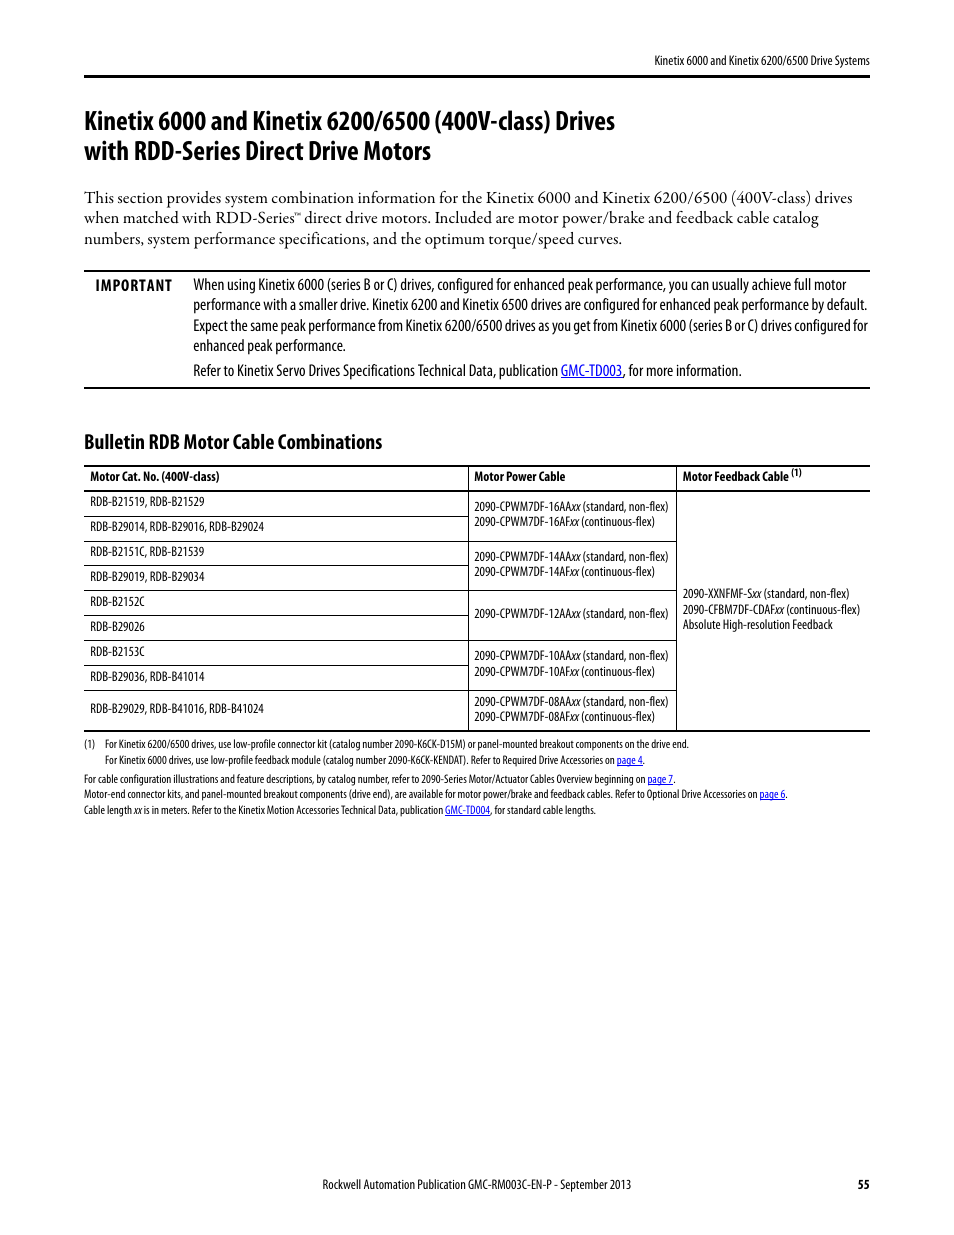 Bulletin rdb motor cable combinations | Rockwell Automation 2094-xxxx